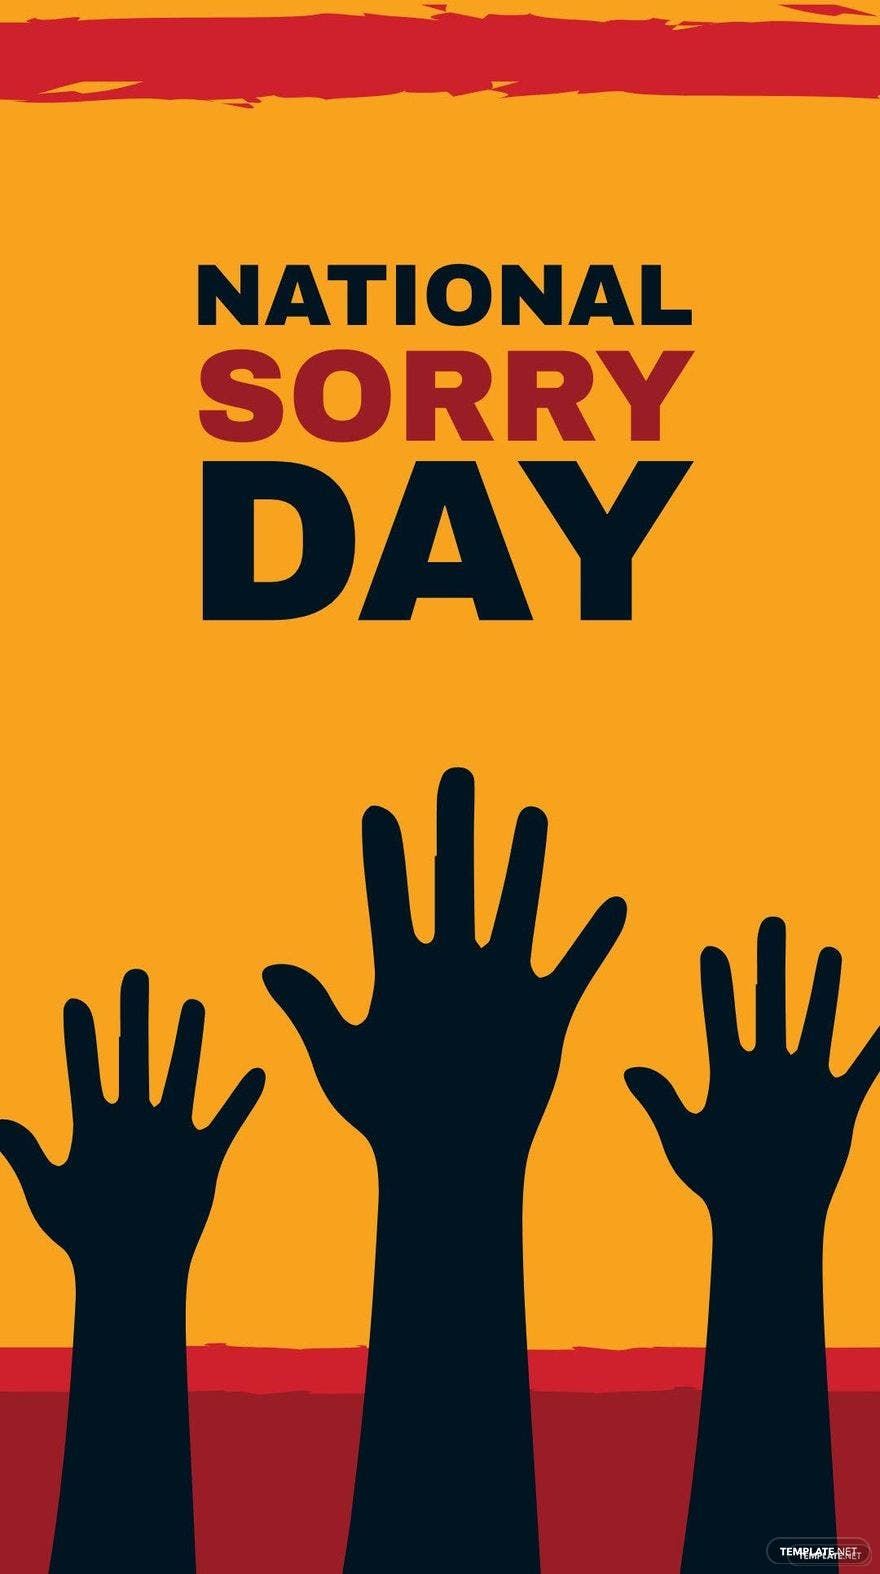 Free National Sorry Day iPhone Background in PDF, Illustrator, PSD, EPS, SVG, JPG, PNG